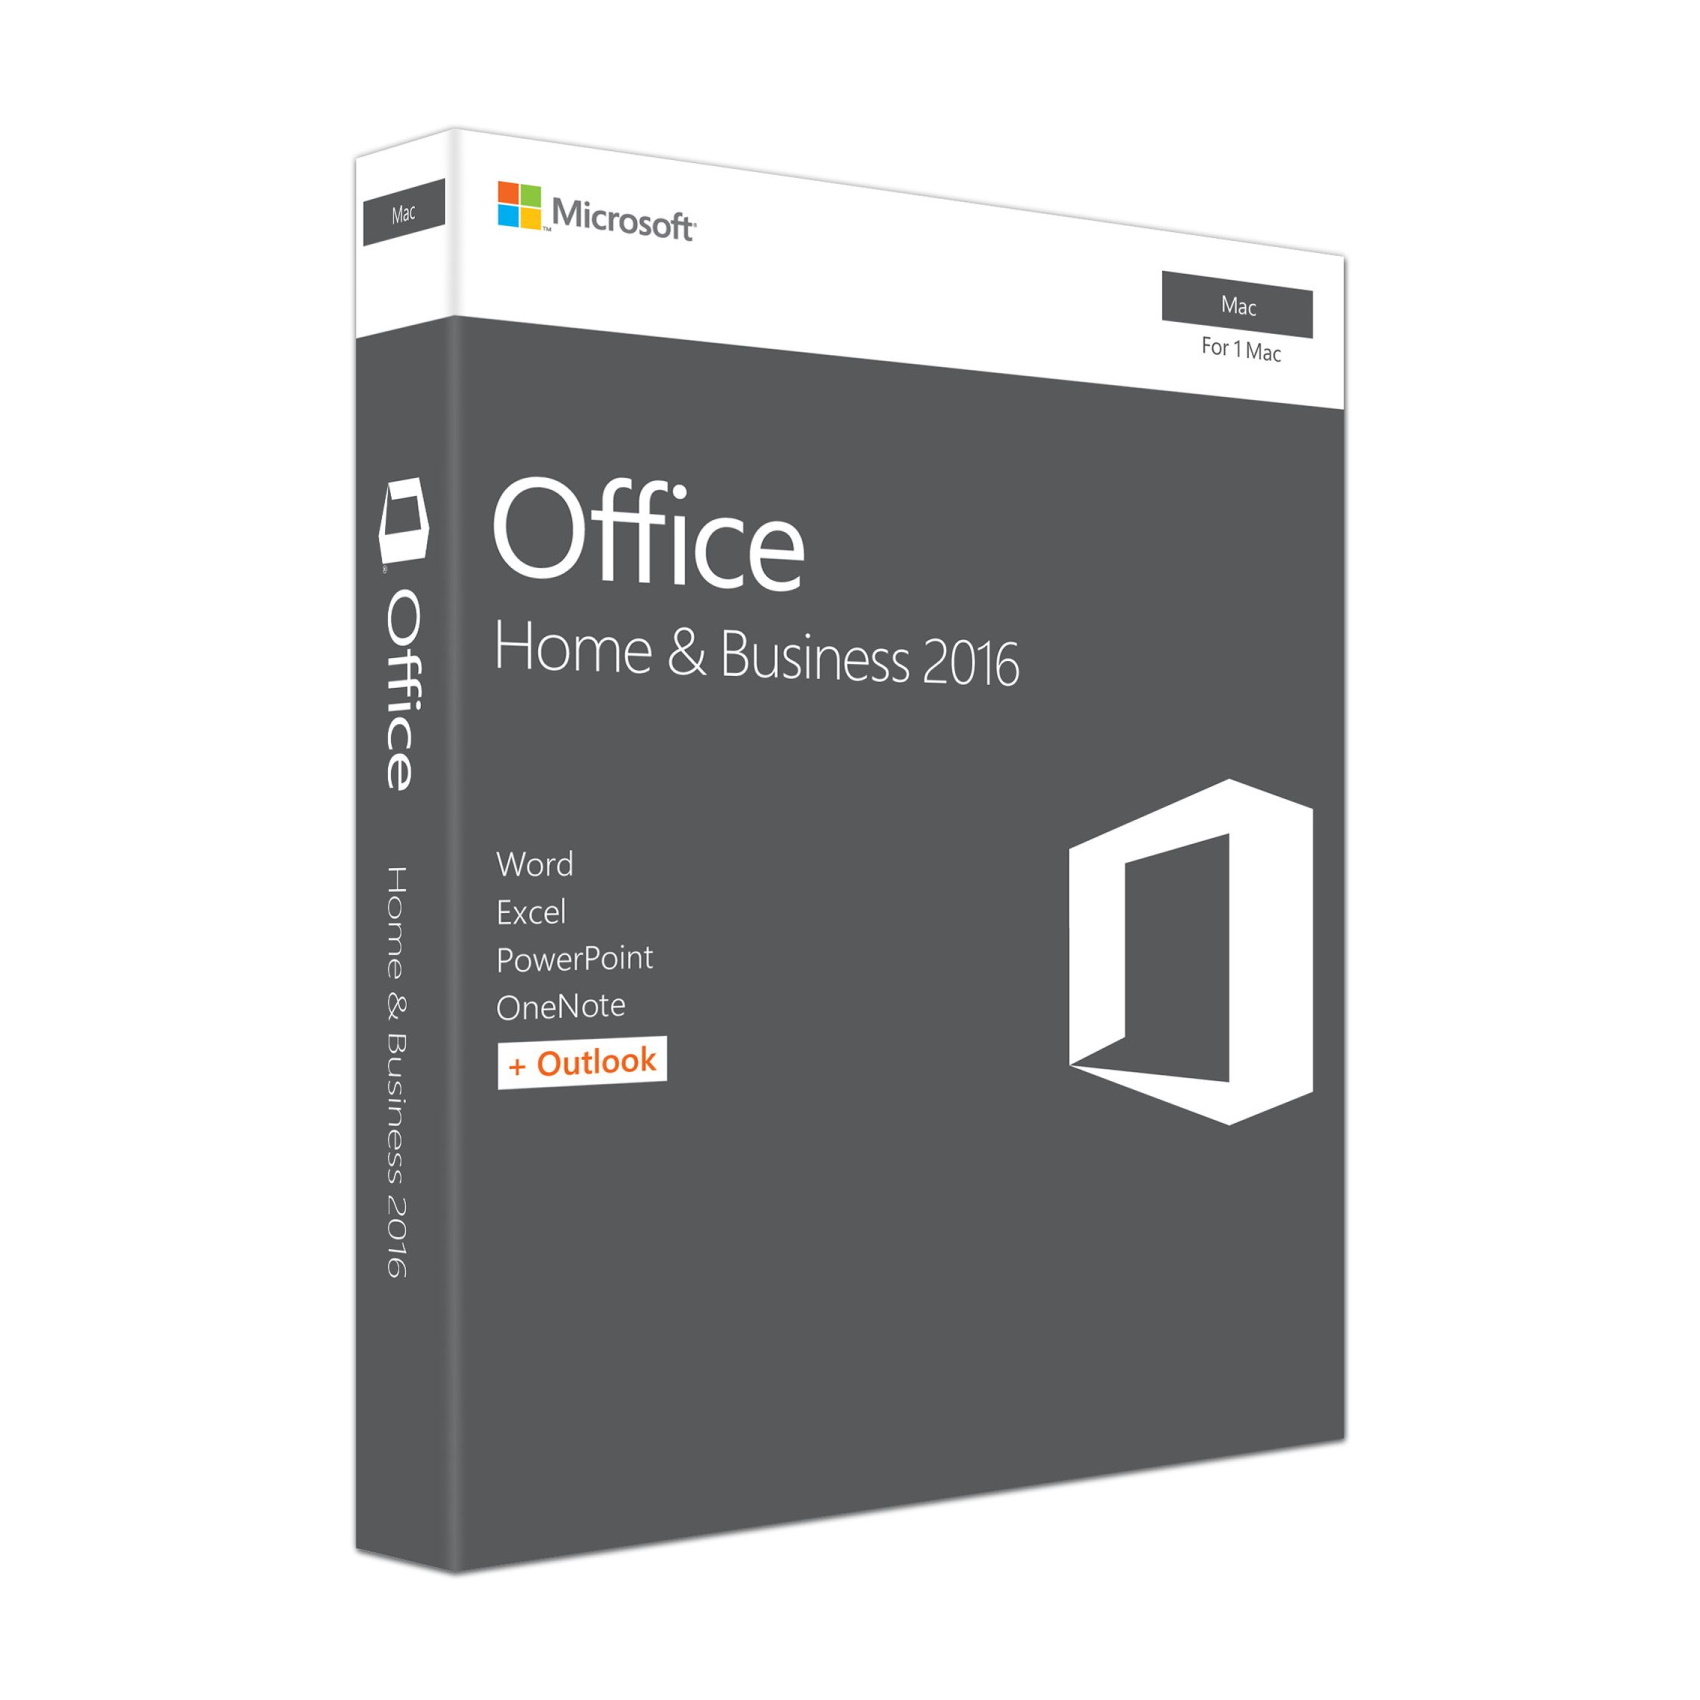 microsoft office suite for mac home business